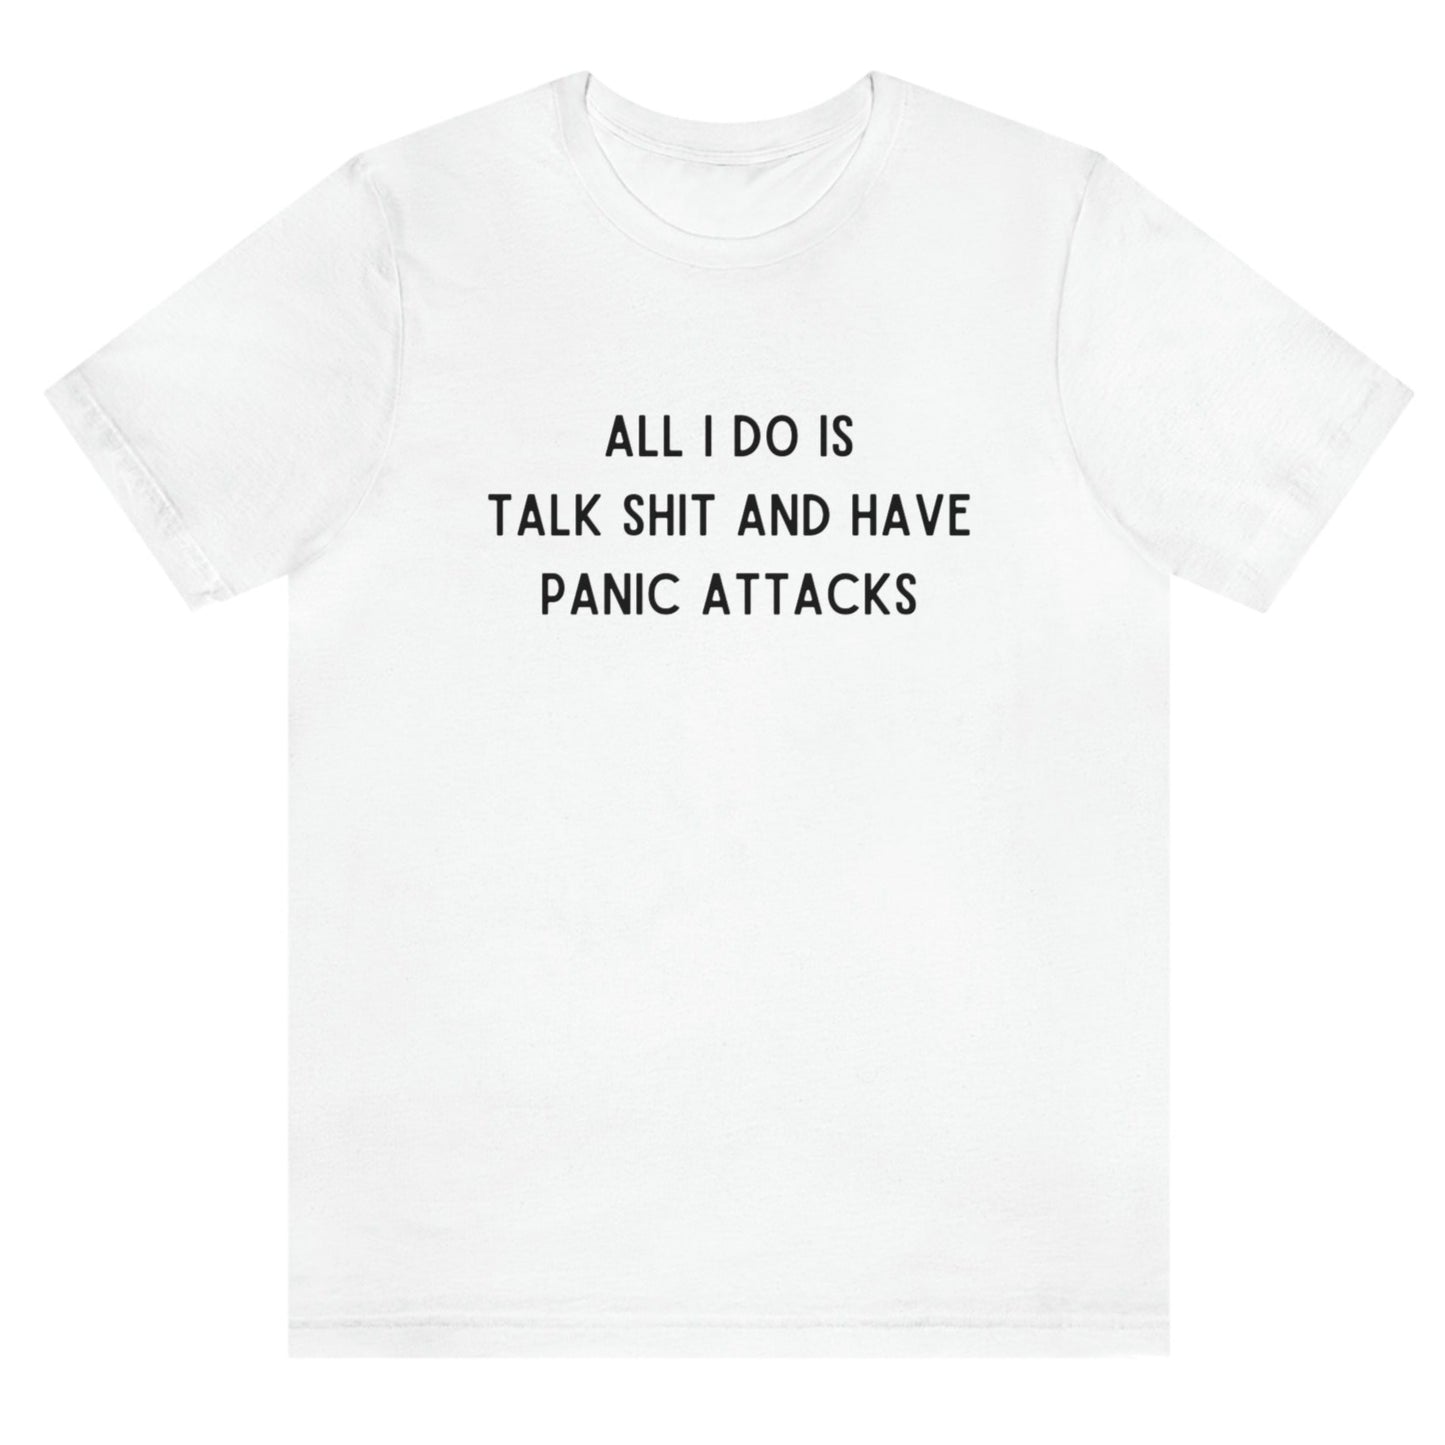 all-i-do-is-talk-shit-and-have-panic-attacks-white-t-shirt-funny-unisex